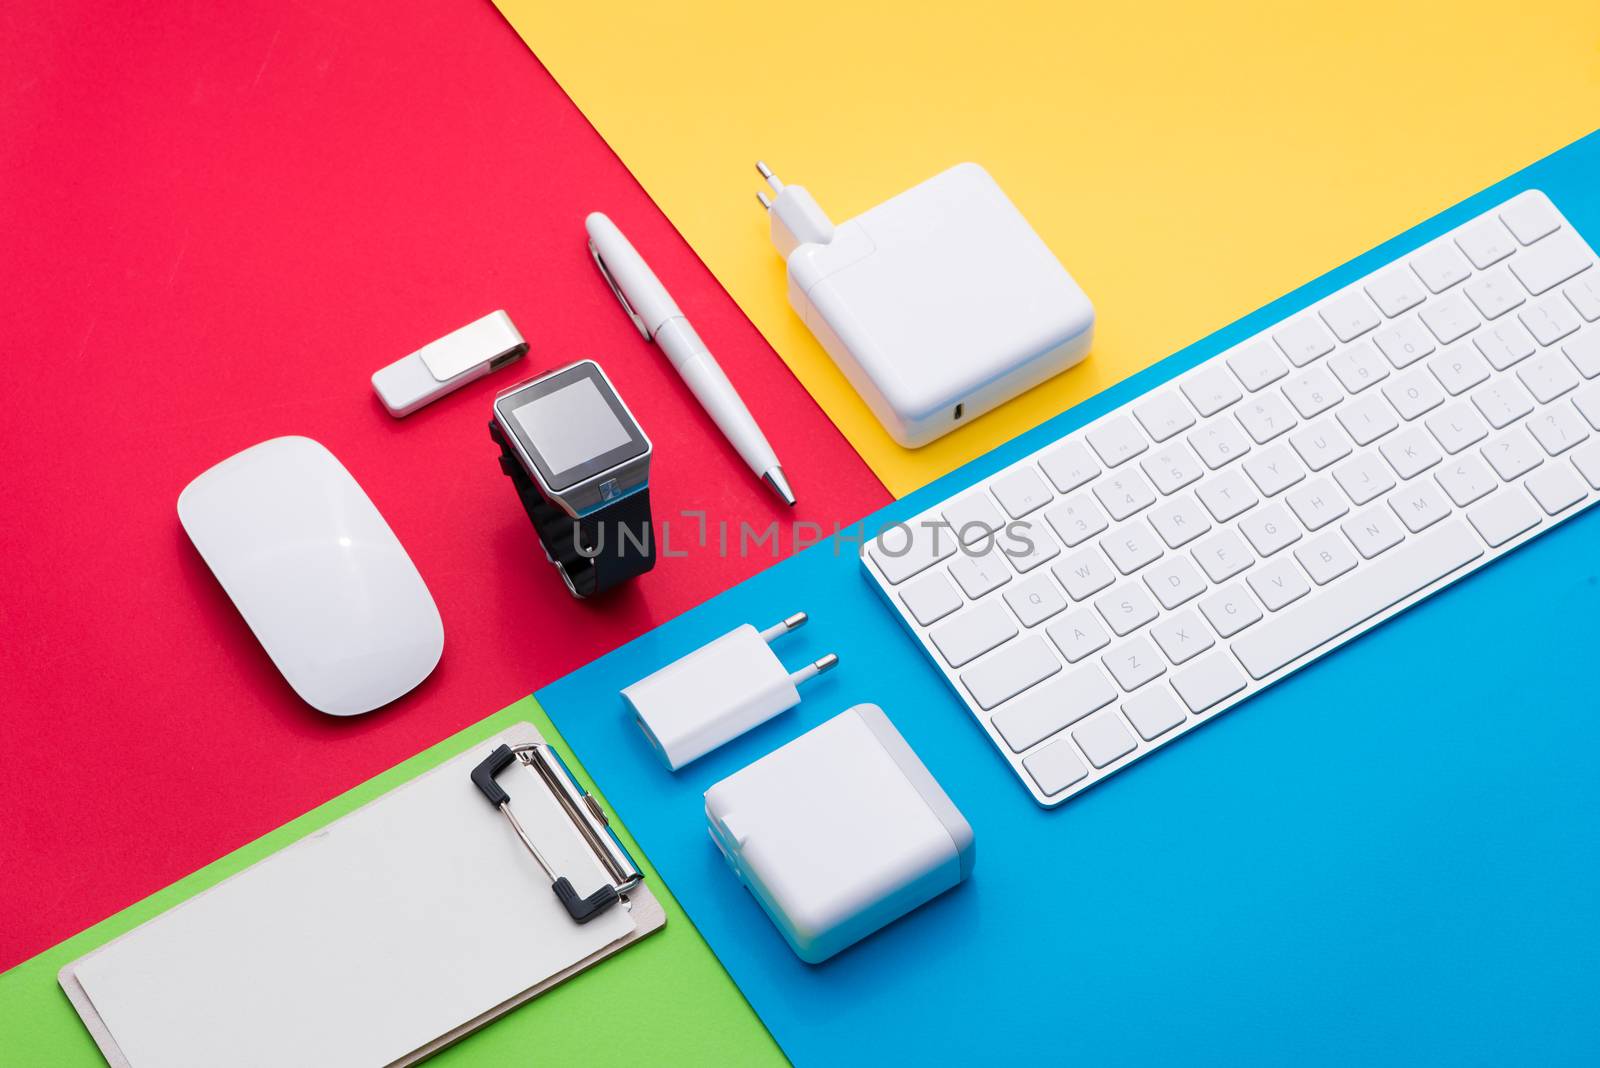 Well organised white office objects on colorful background by makidotvn